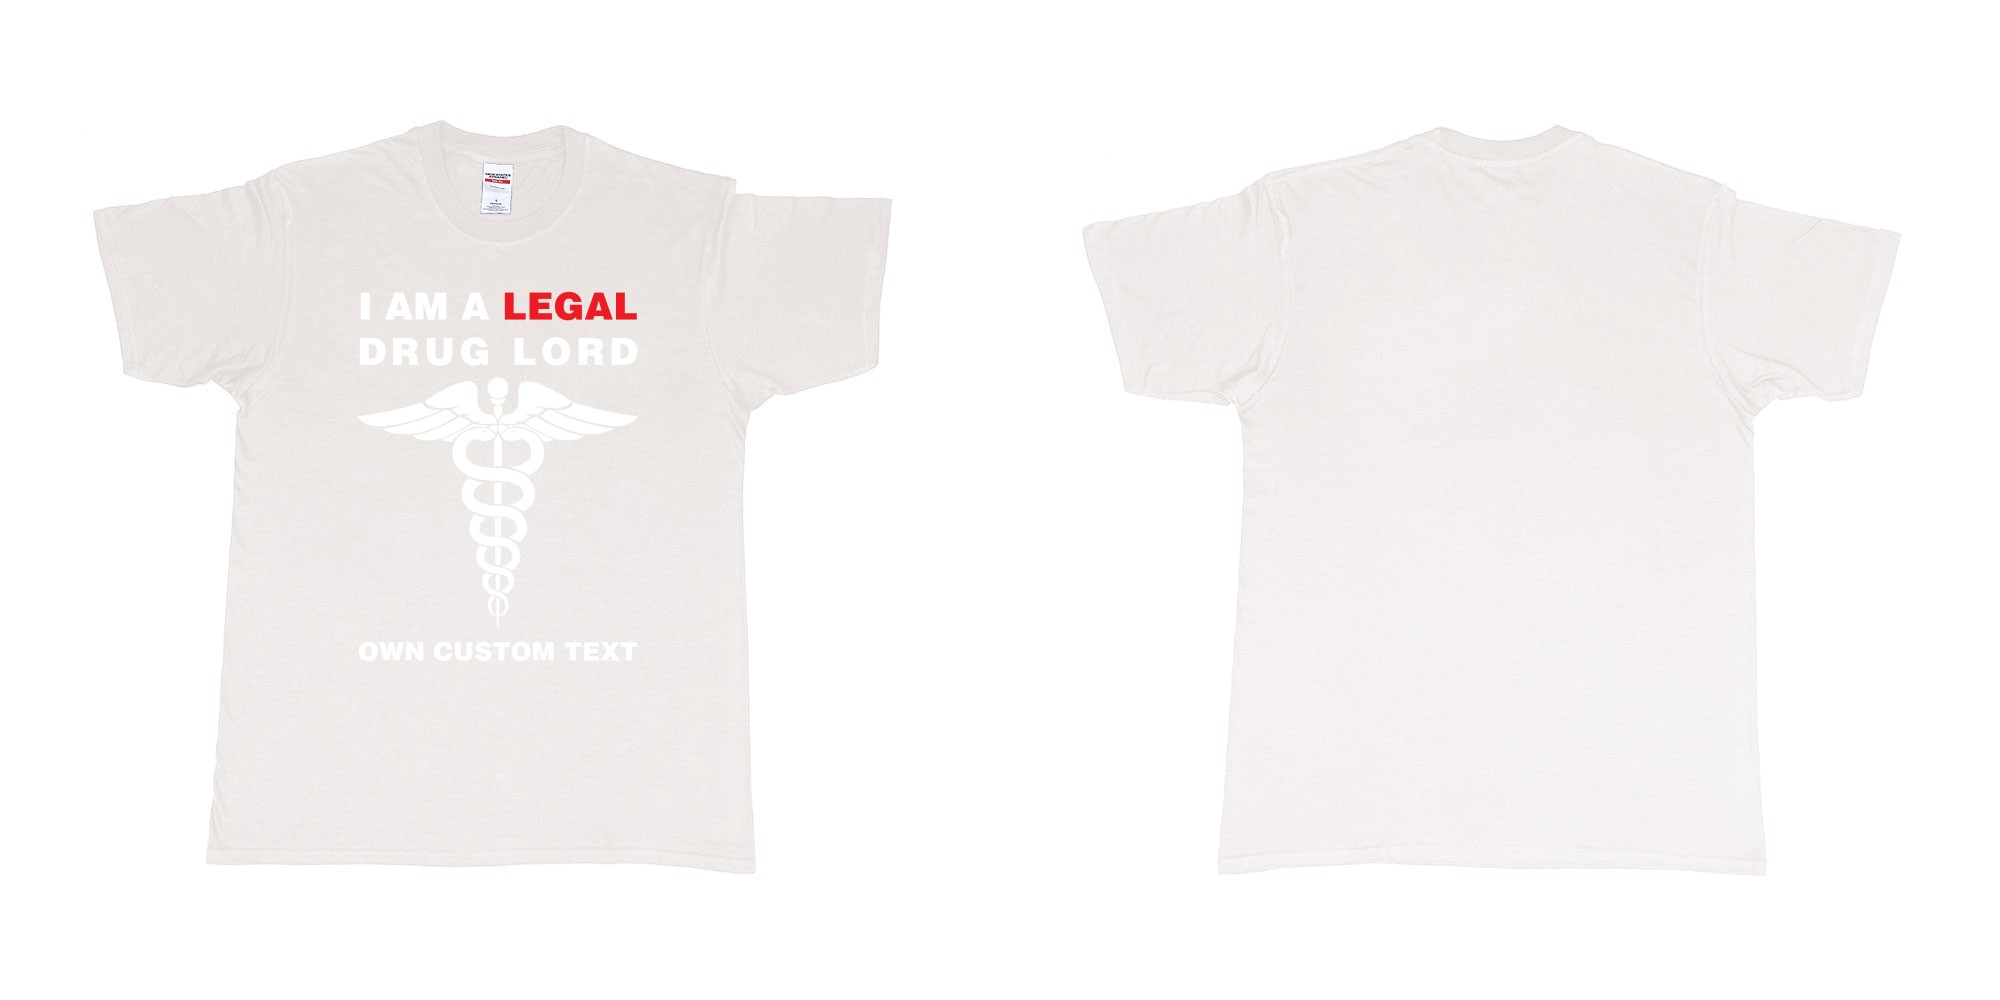 Custom tshirt design legal drug lord in fabric color white choice your own text made in Bali by The Pirate Way